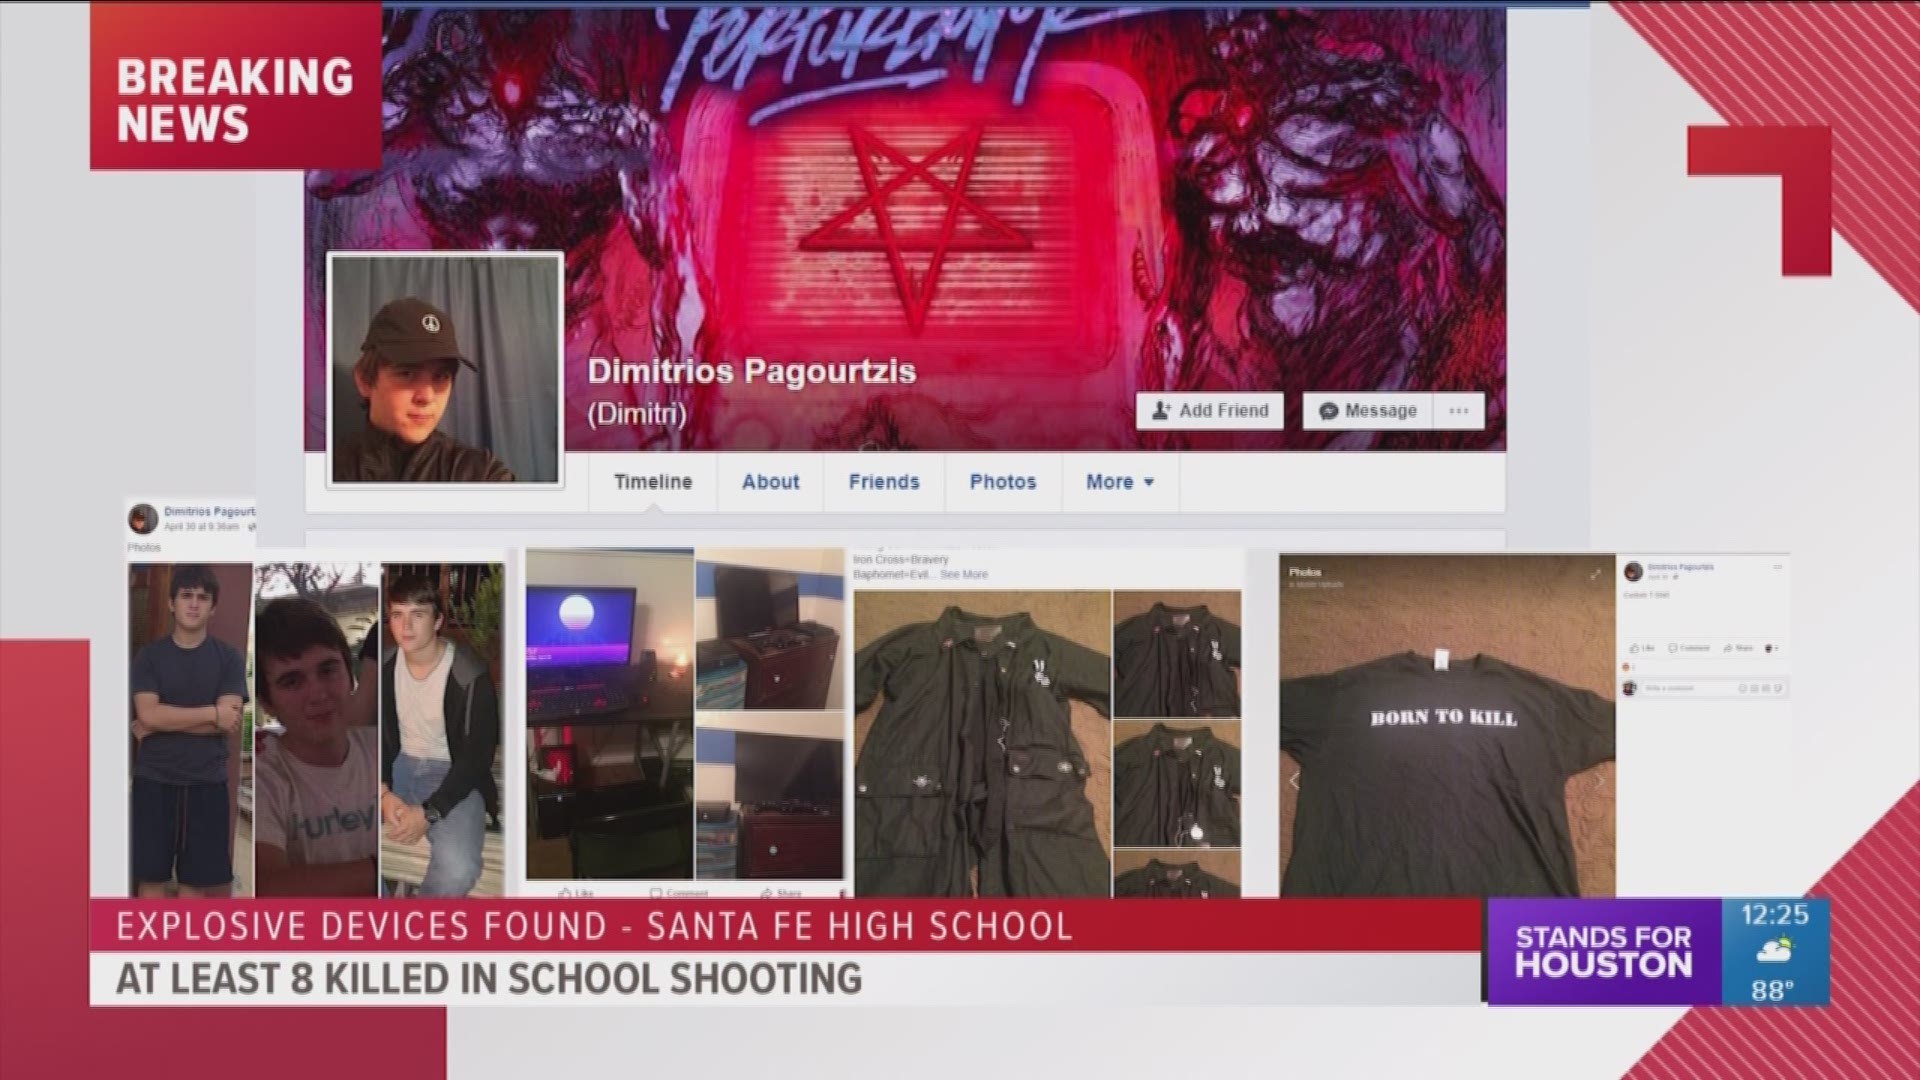 The student who opened fire at Santa Fe High School Friday morning has been identified as 17-year-old Dimitrios Pagourtzis, according to an FBI source. Police say Pagourtzis shot and killed at least eight people and wounded several others. Several law enf